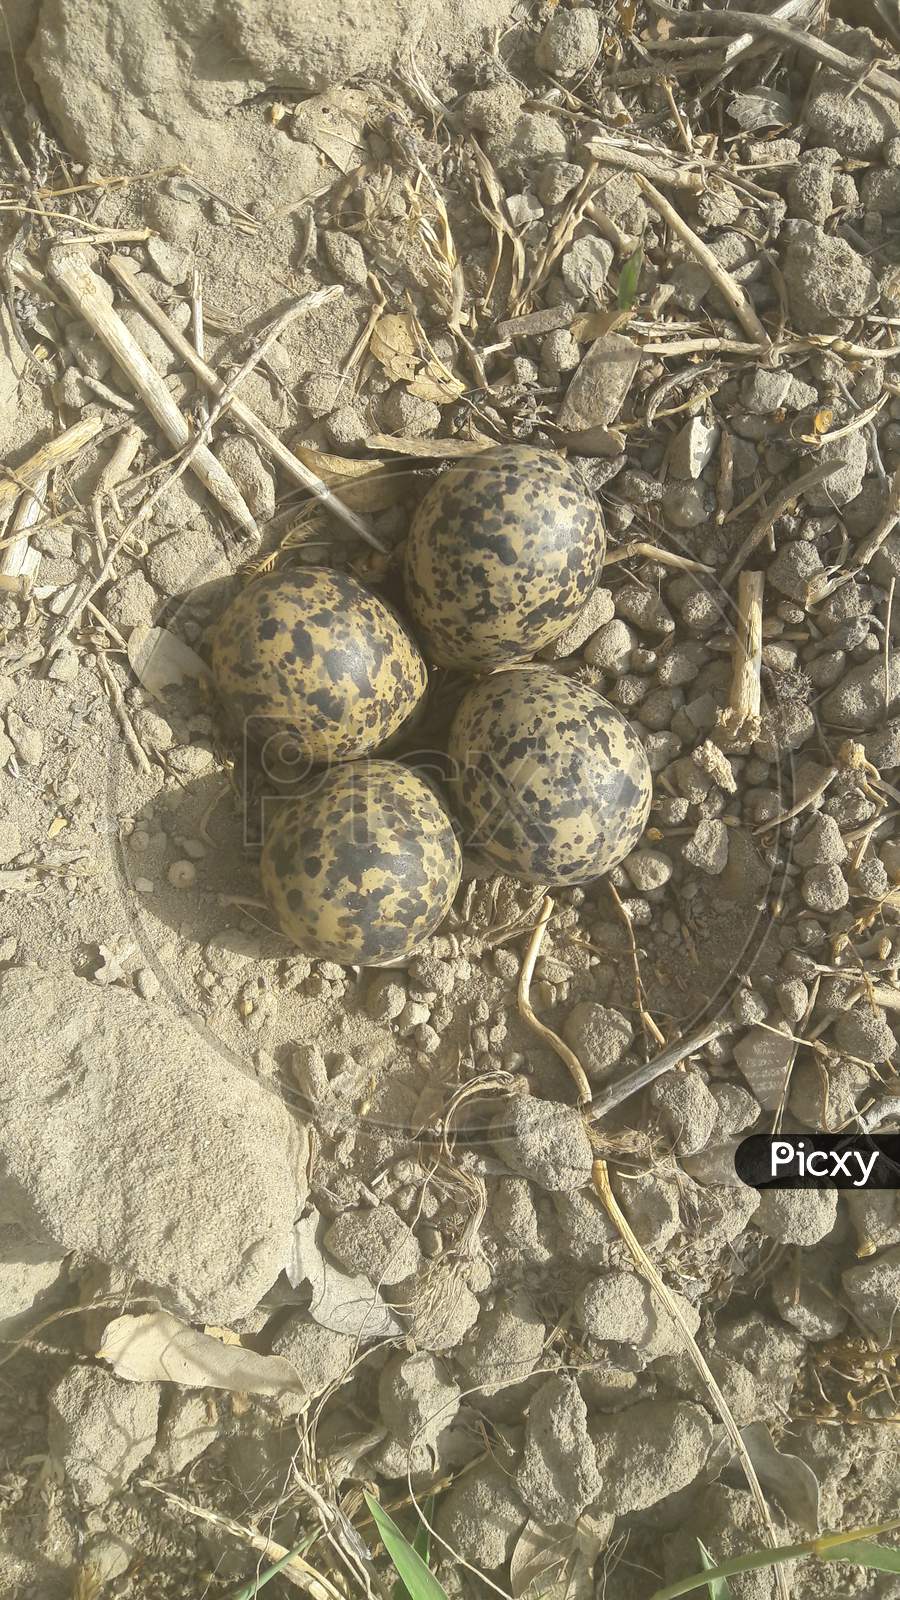 Red Wattled Lapwing eggs In The Nest